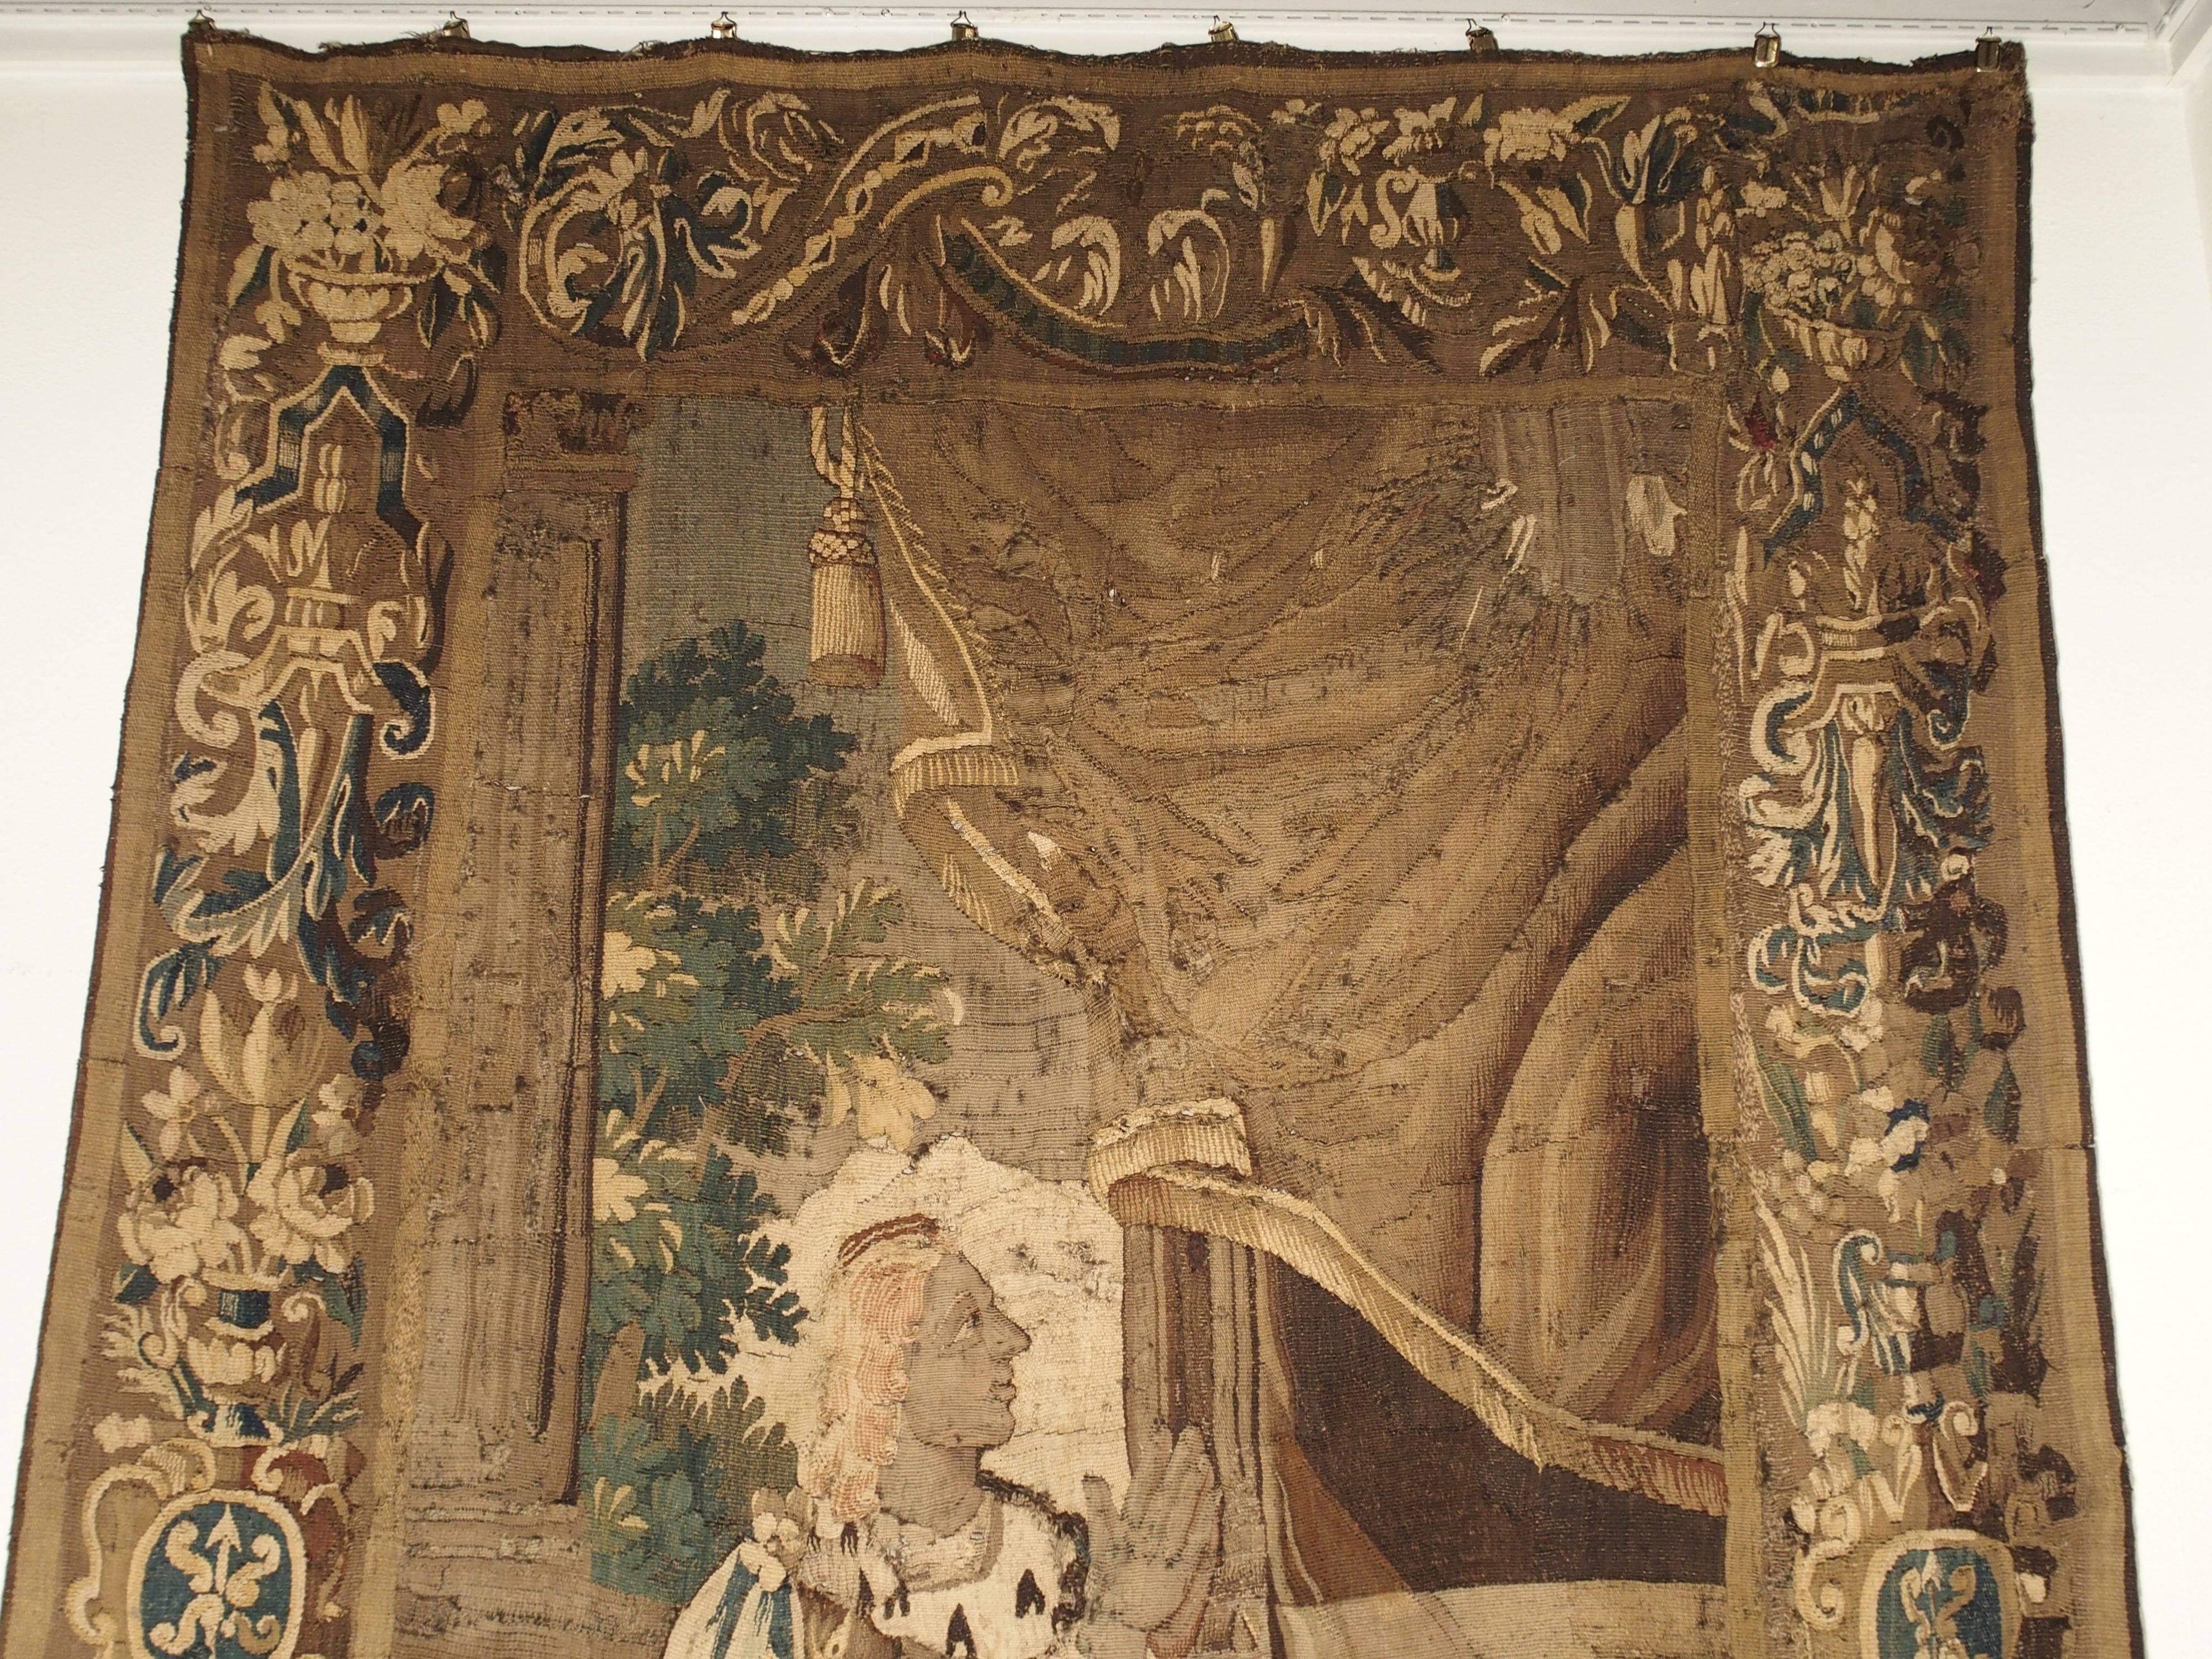 Dyed French Aubusson Tapestry Depicting the Coronation of a King, circa 1600